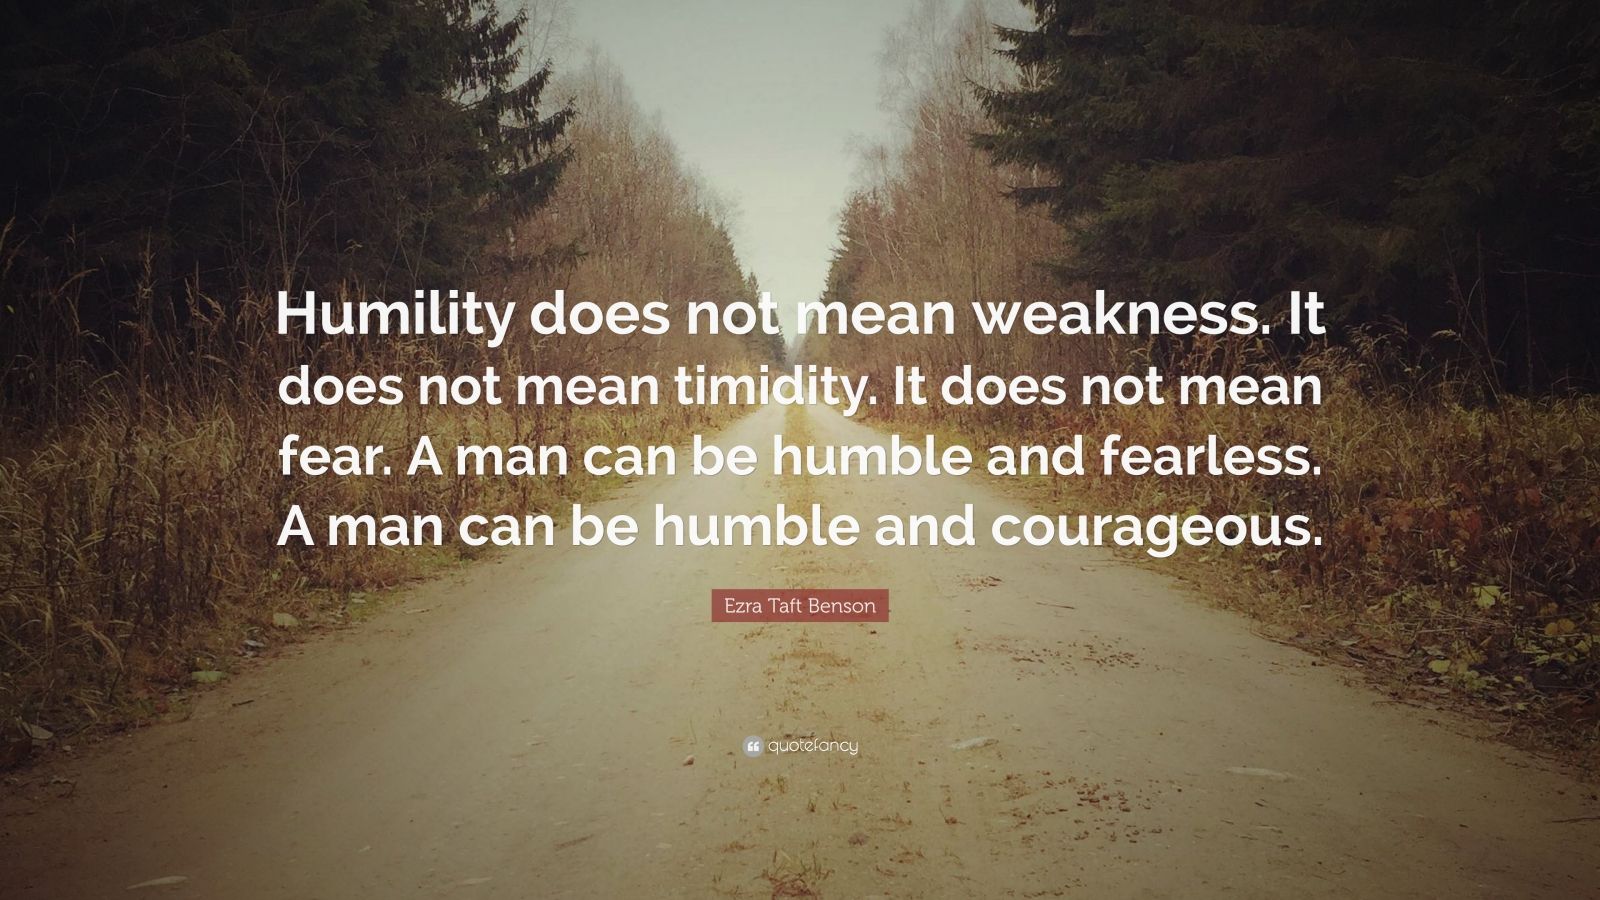 Ezra Taft Benson Quote: “Humility does not mean weakness. It does not ...